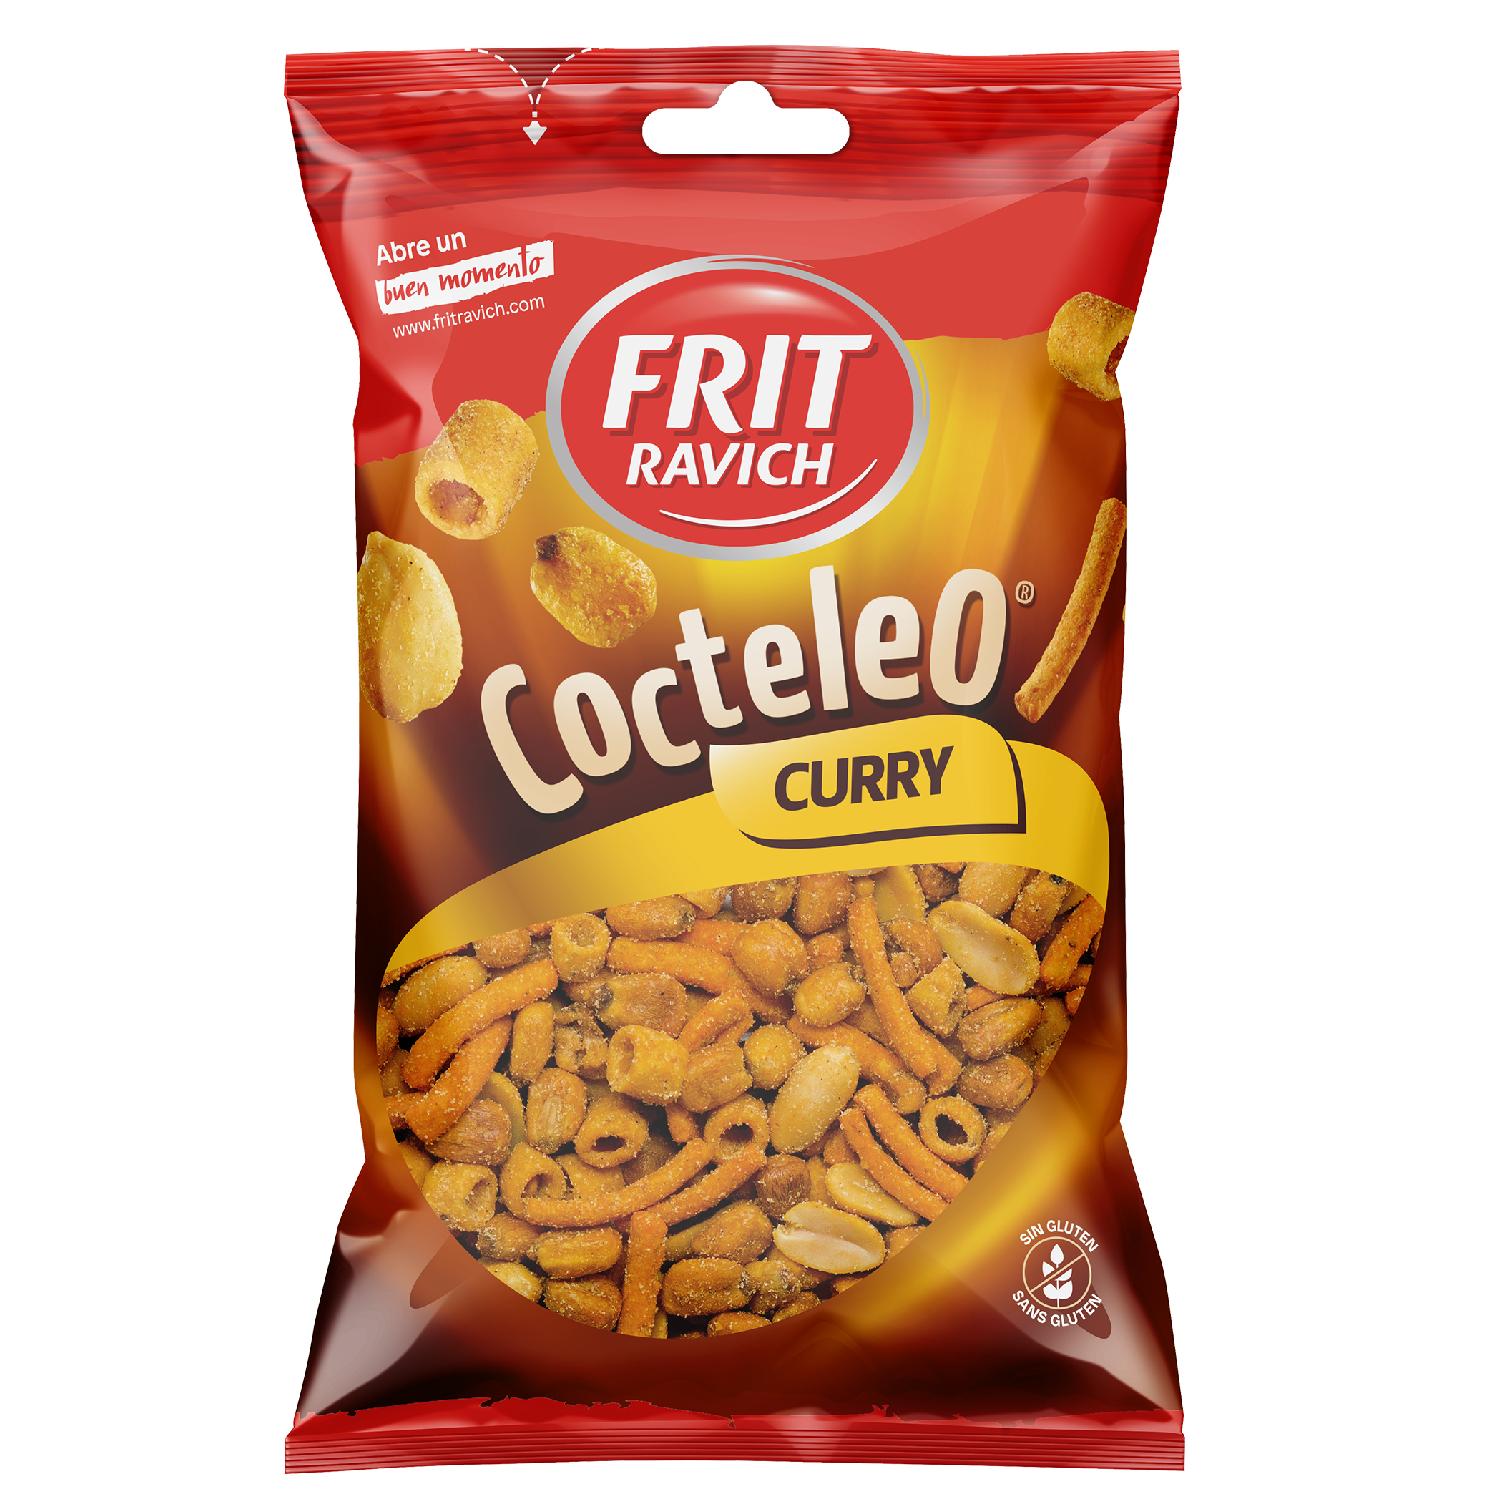 cocktail curry frit ravich 140g